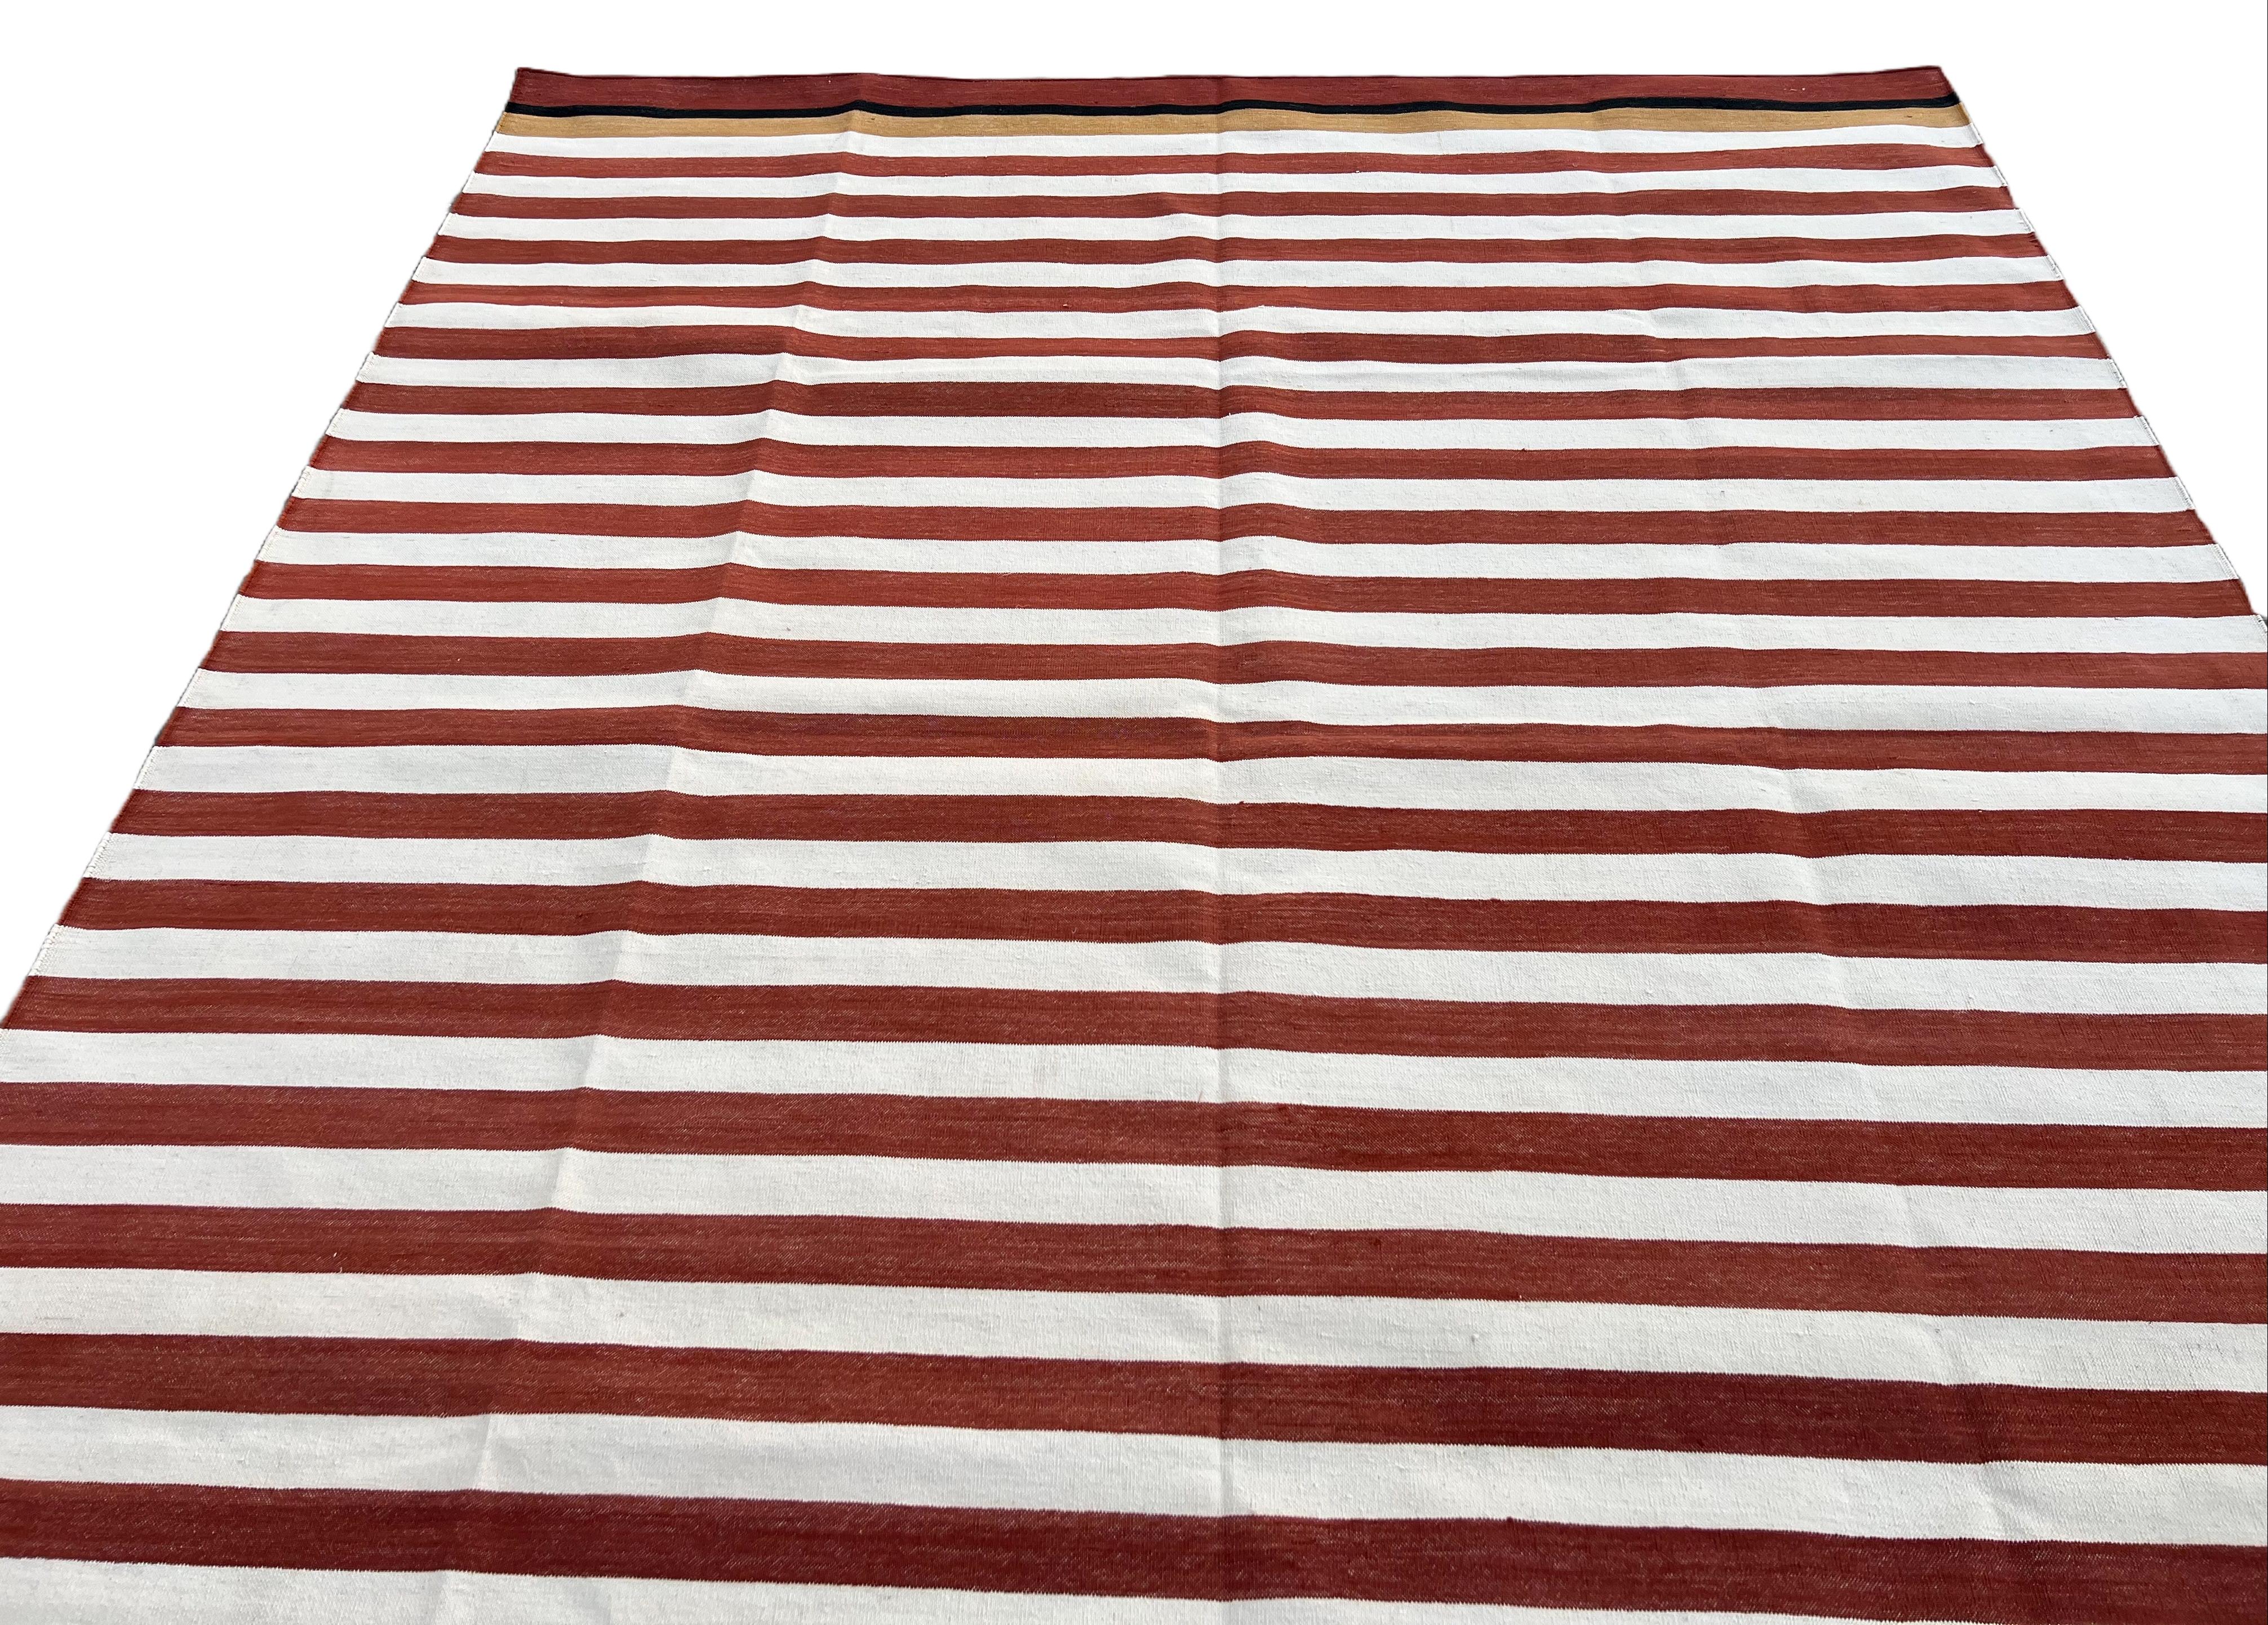 Handmade Cotton Area Flat Weave Rug, 6x9 Red And White Stripe Indian Dhurrie Rug For Sale 5